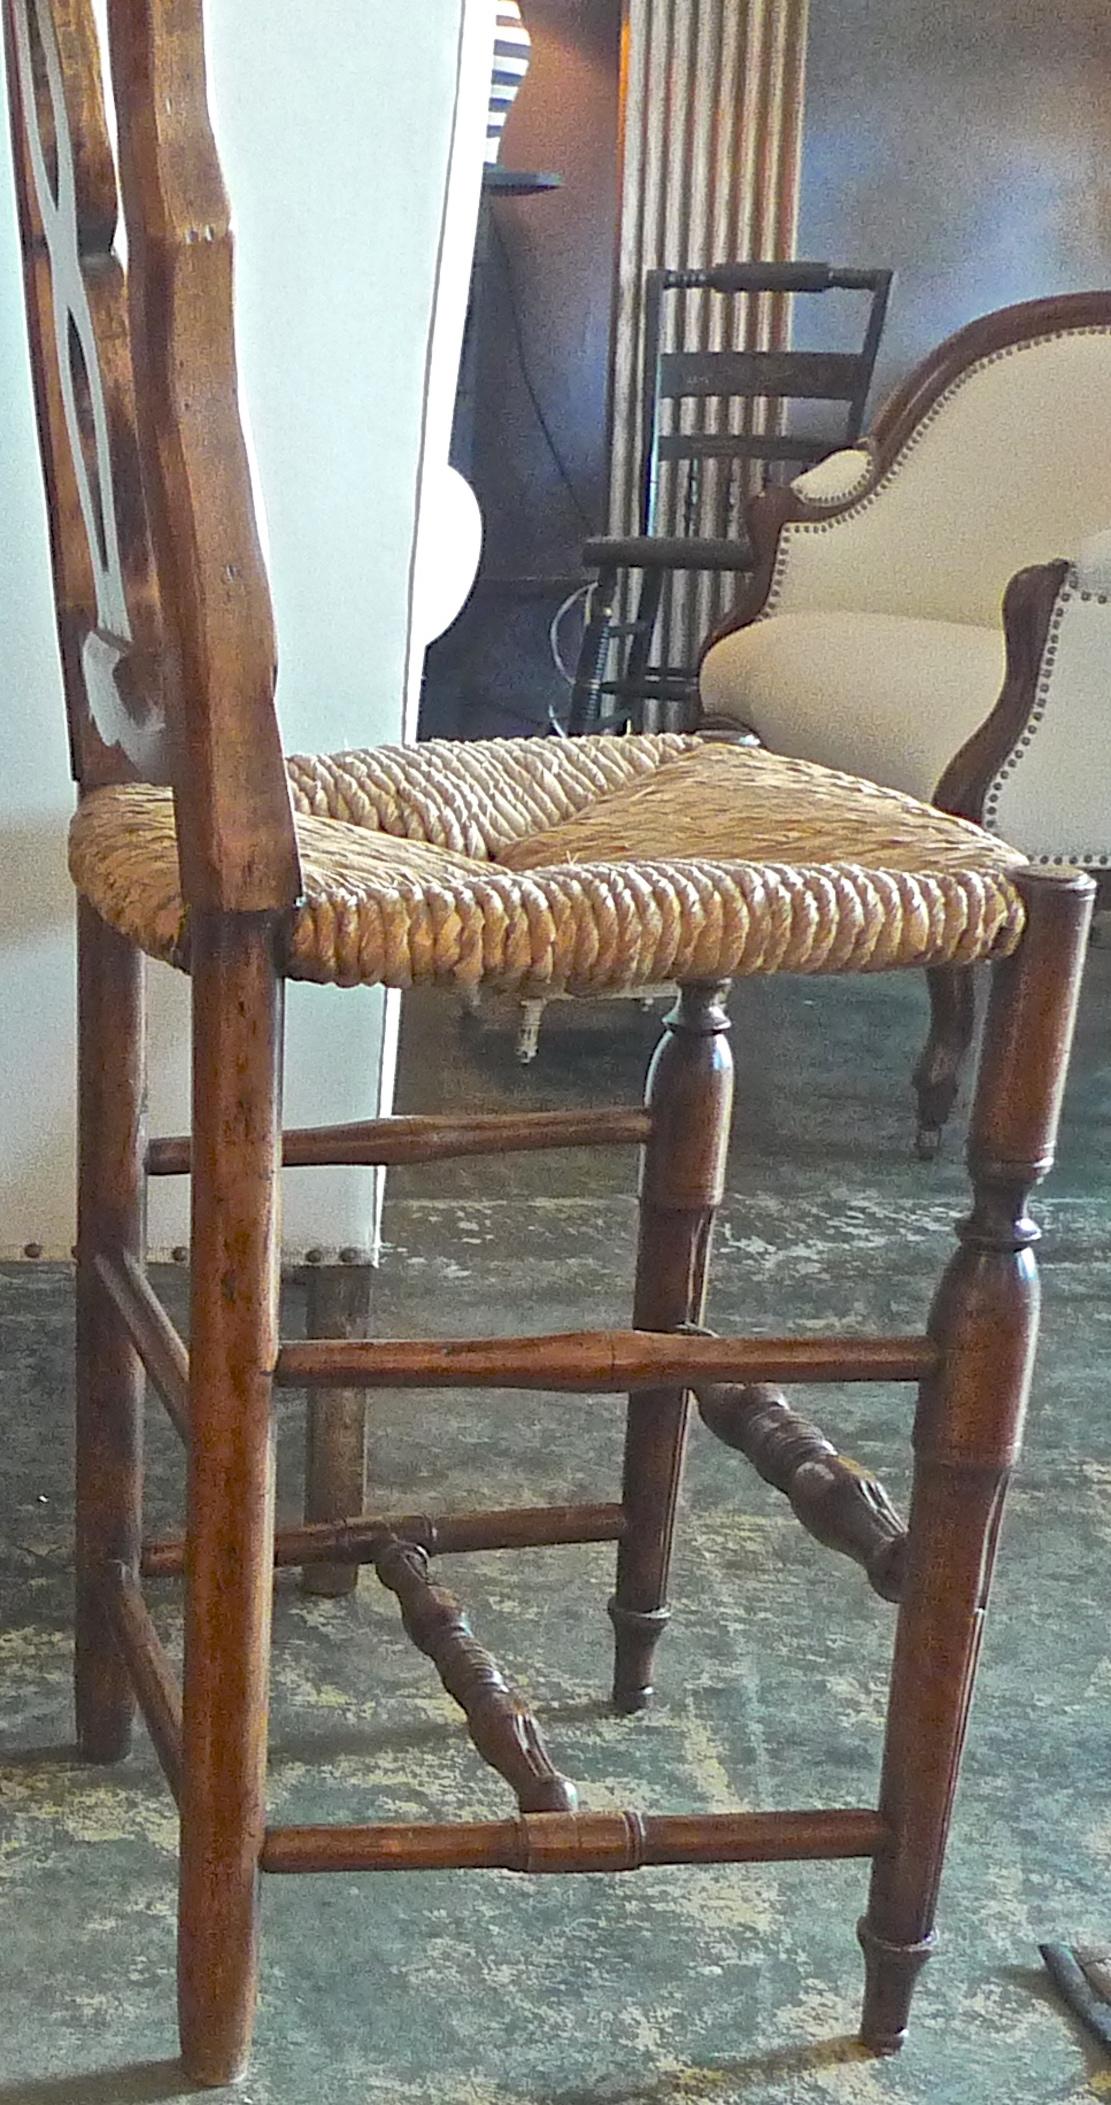 We had original French 19th century Louis XVI dining chairs from which we reproduced the make and design for our reproductions. We make side chairs, armchairs, counter and bar stools to customers specifications. The lead time is usually 5-6 weeks.